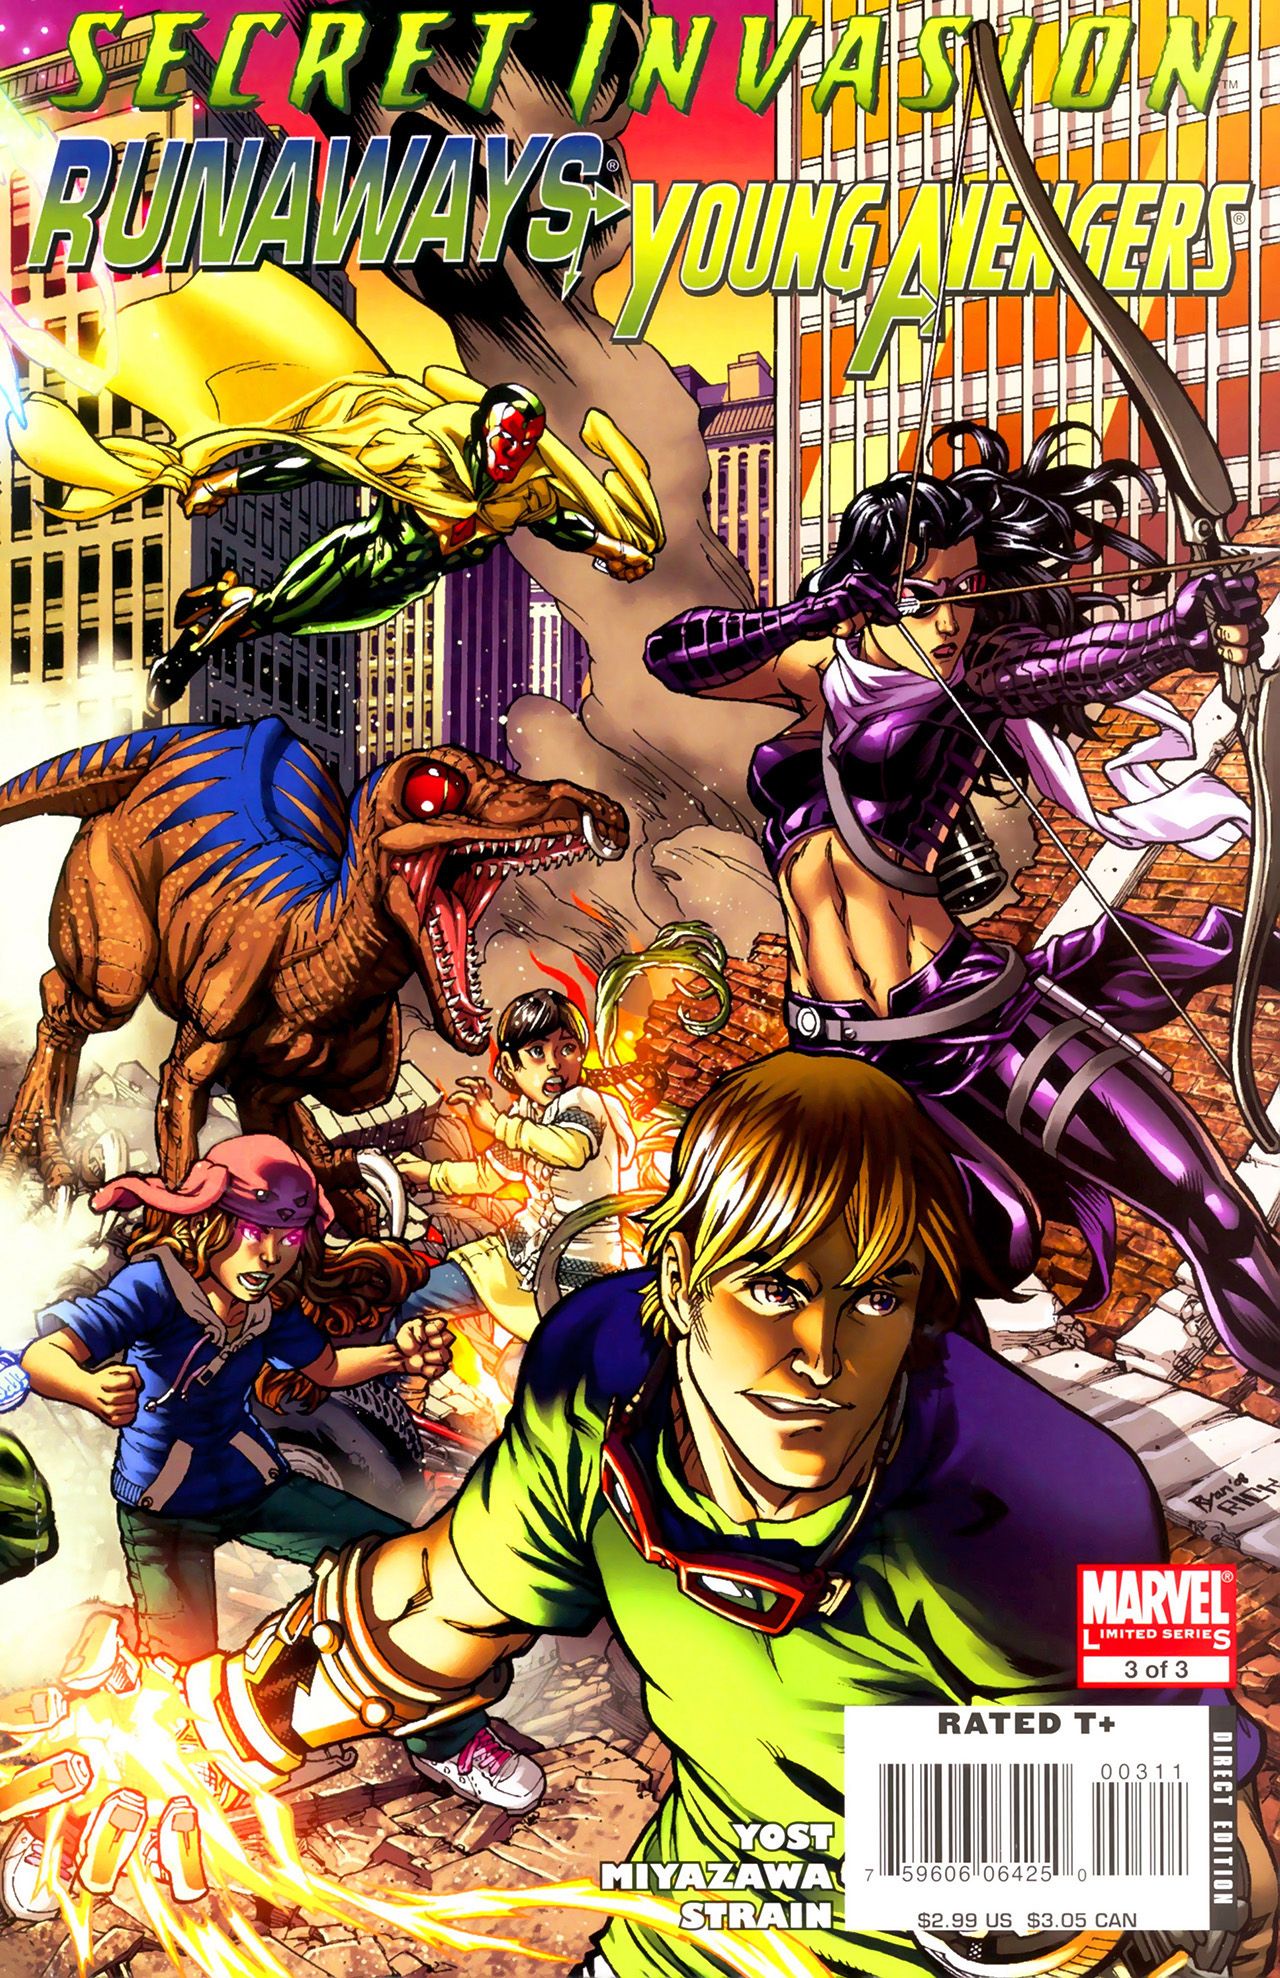 Read online Secret Invasion: Runaways/Young Avengers comic -  Issue #3 - 1